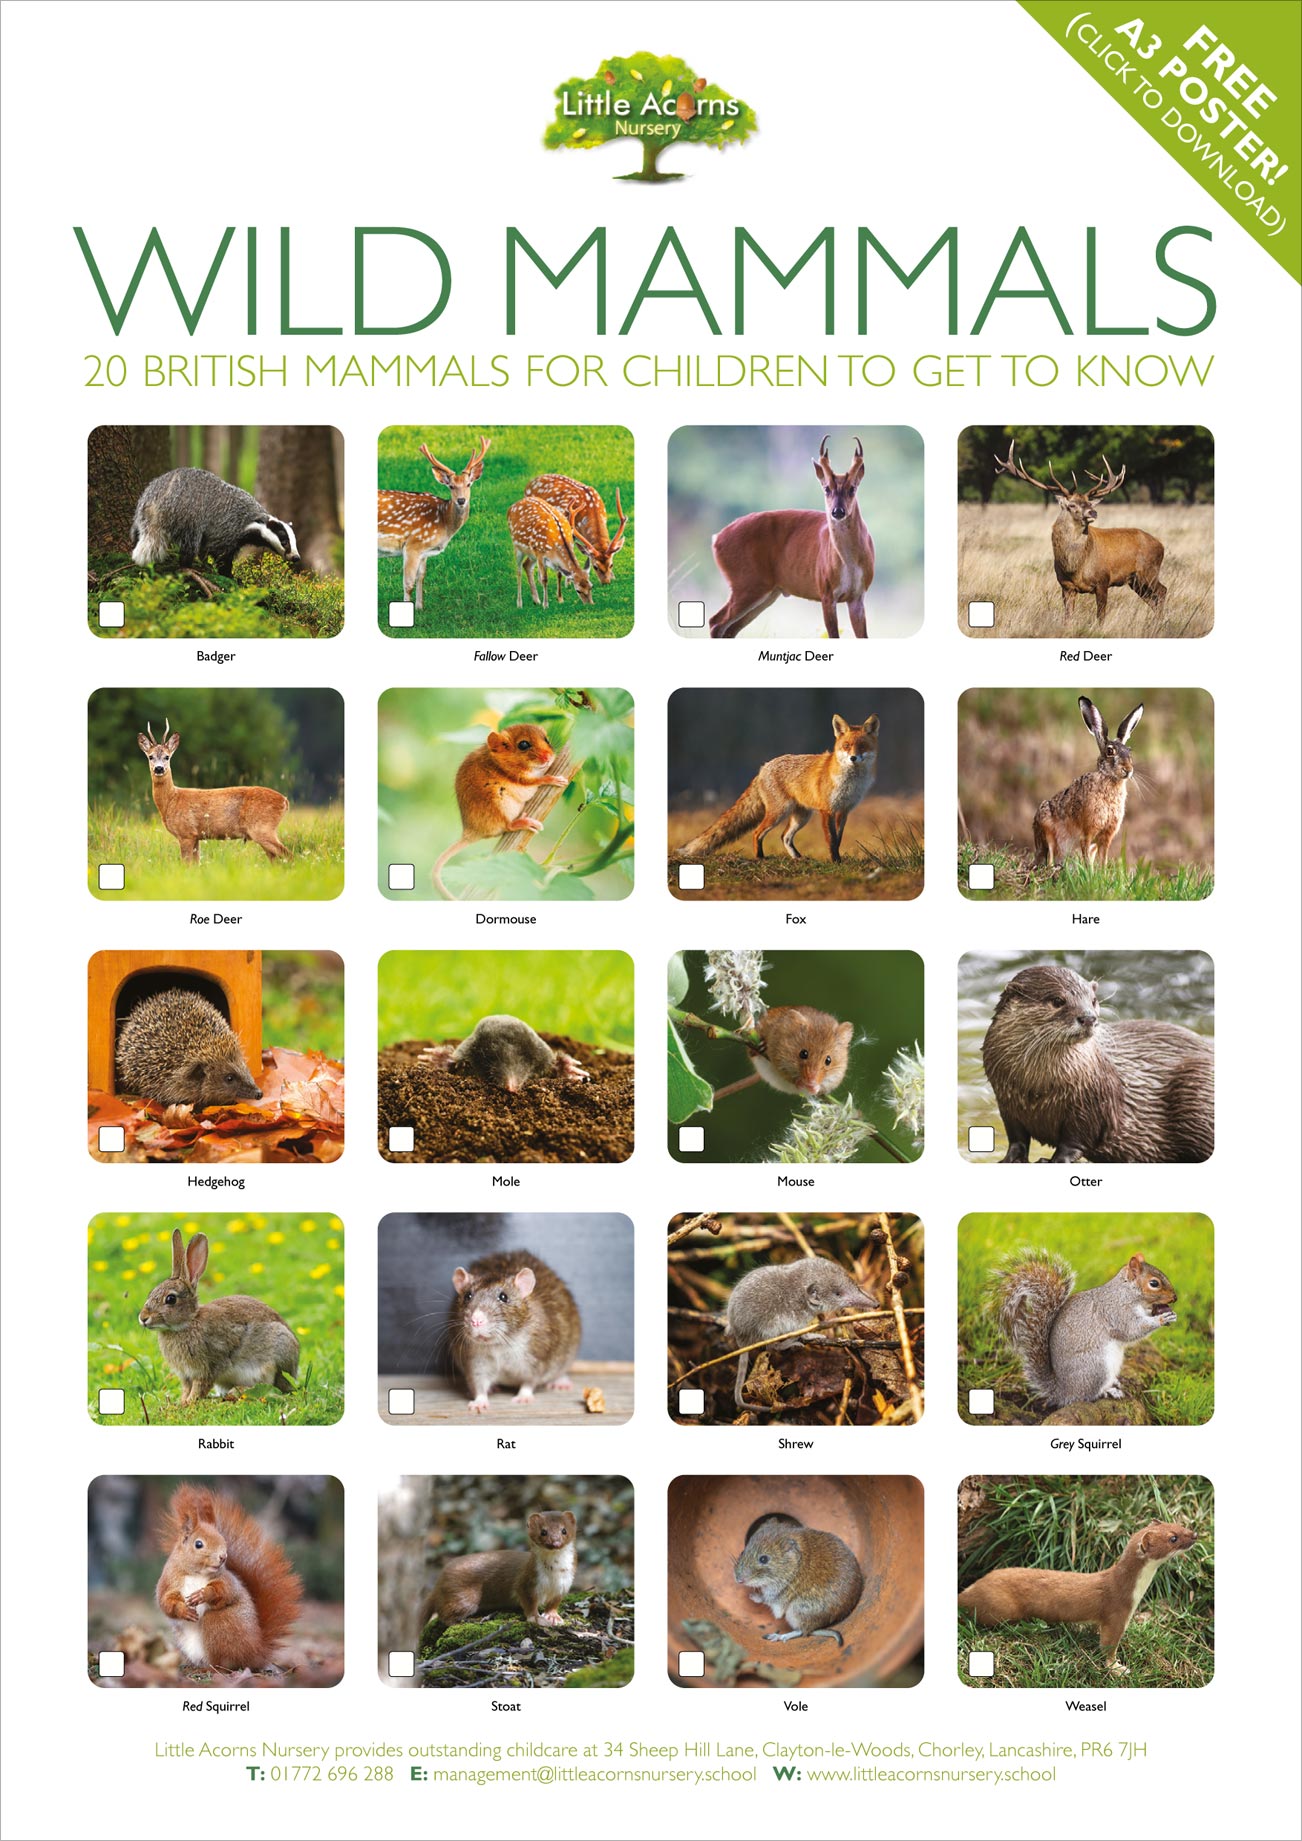 Preview of the free Wild Mammals poster (click to view or download in Acrobat PDF format).